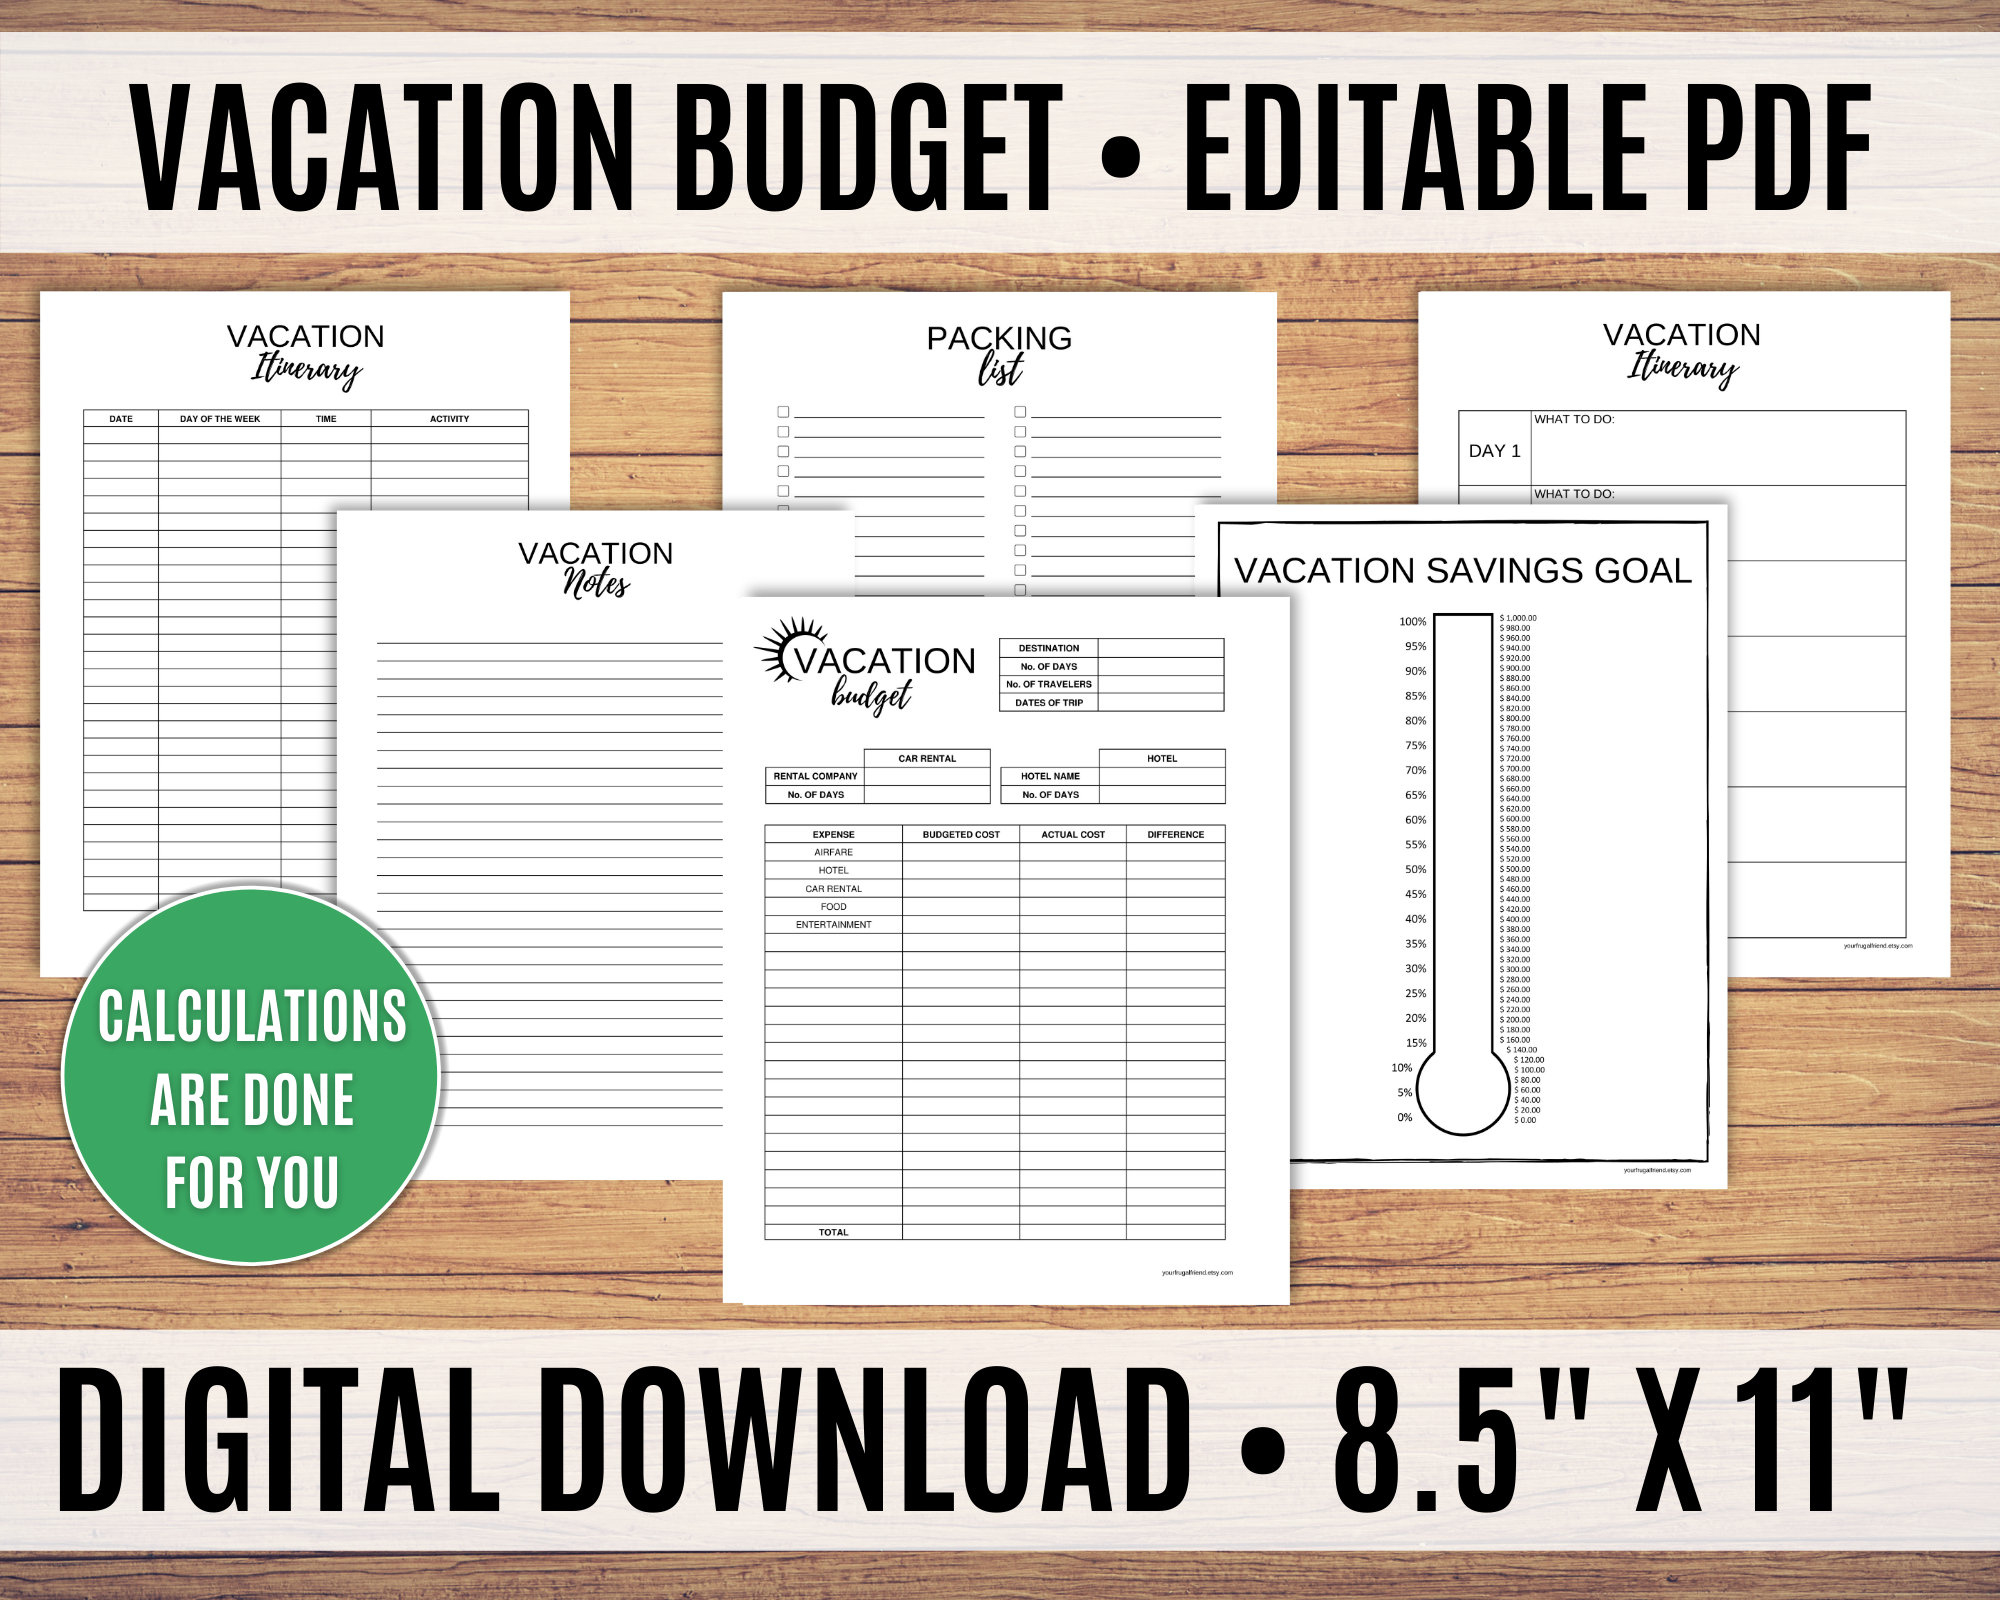 Vacation Planner Vacation Budget Template Vacation | Etsy regarding Vacation Budget Planner Template